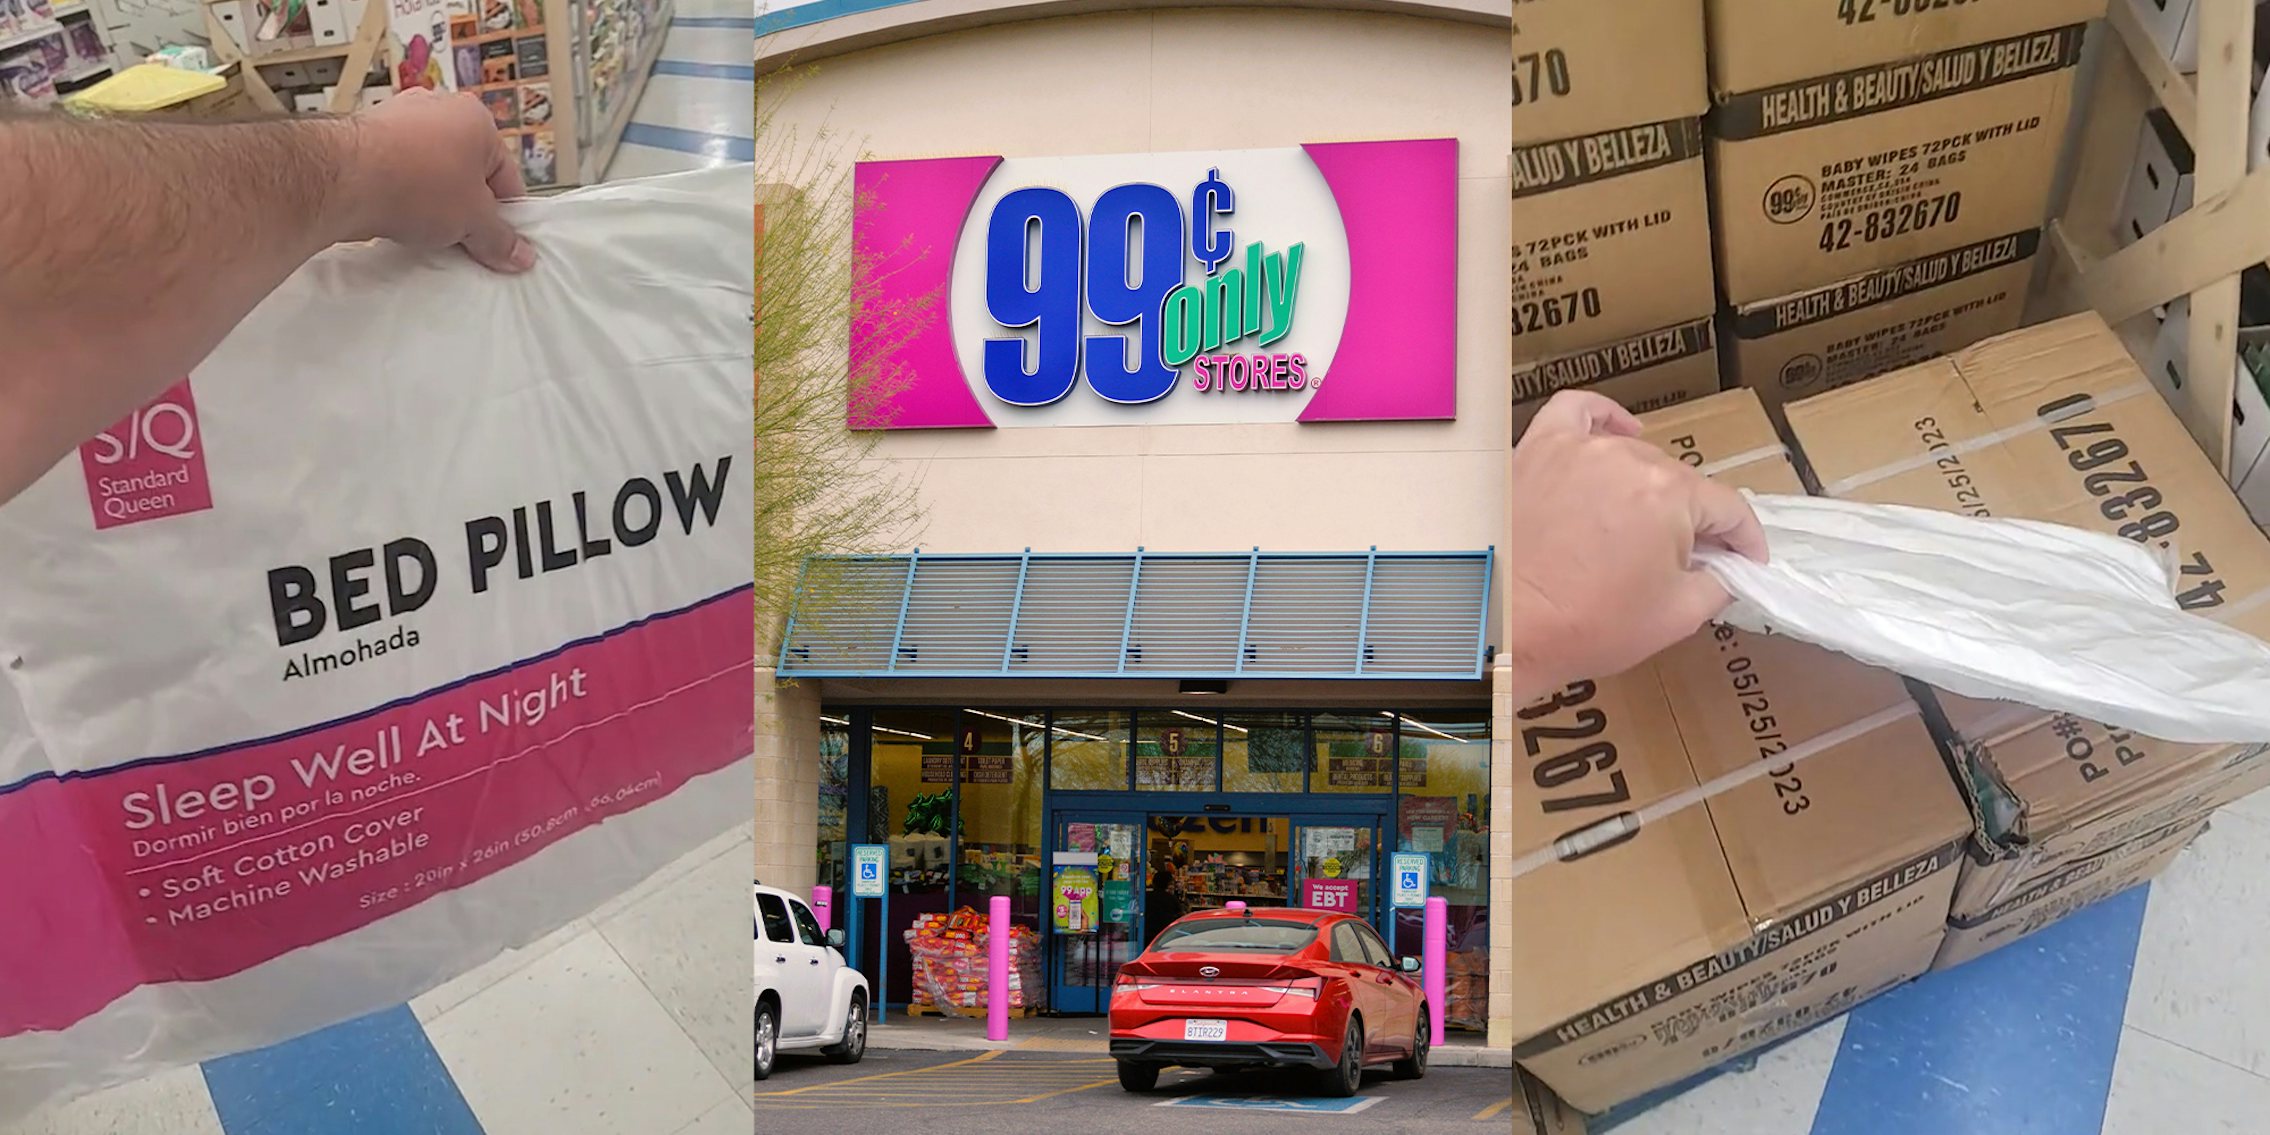 Customer complains about 'flat pillow' he found at 99 Cent Store